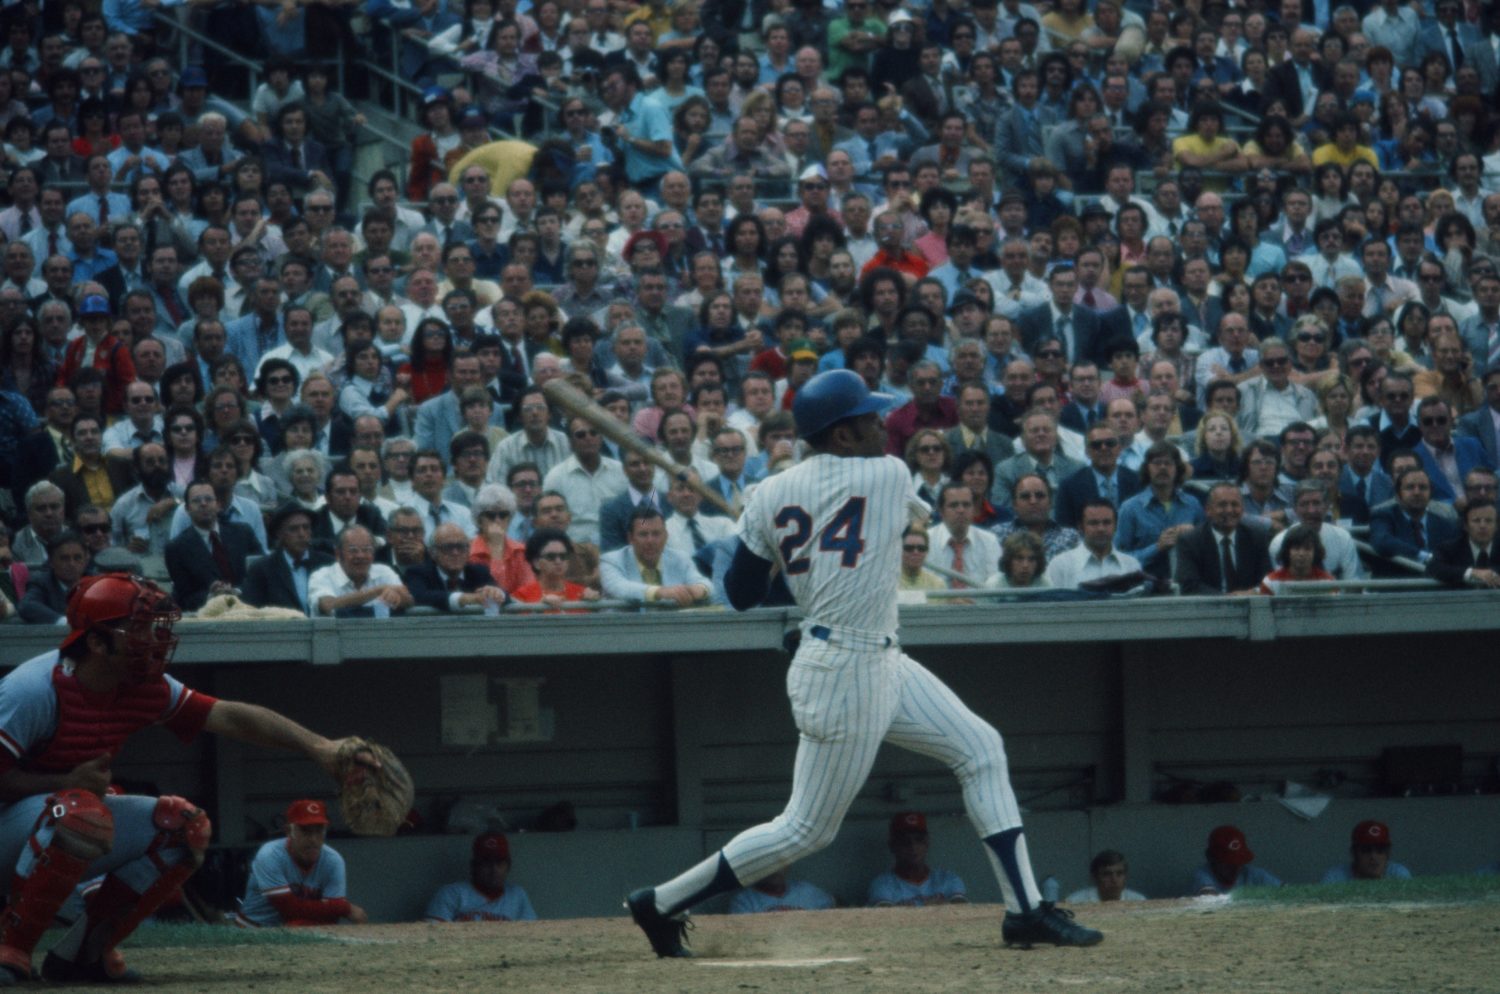 Willie Mays Hits a Pitch During Game 5 of 1973 NLCS